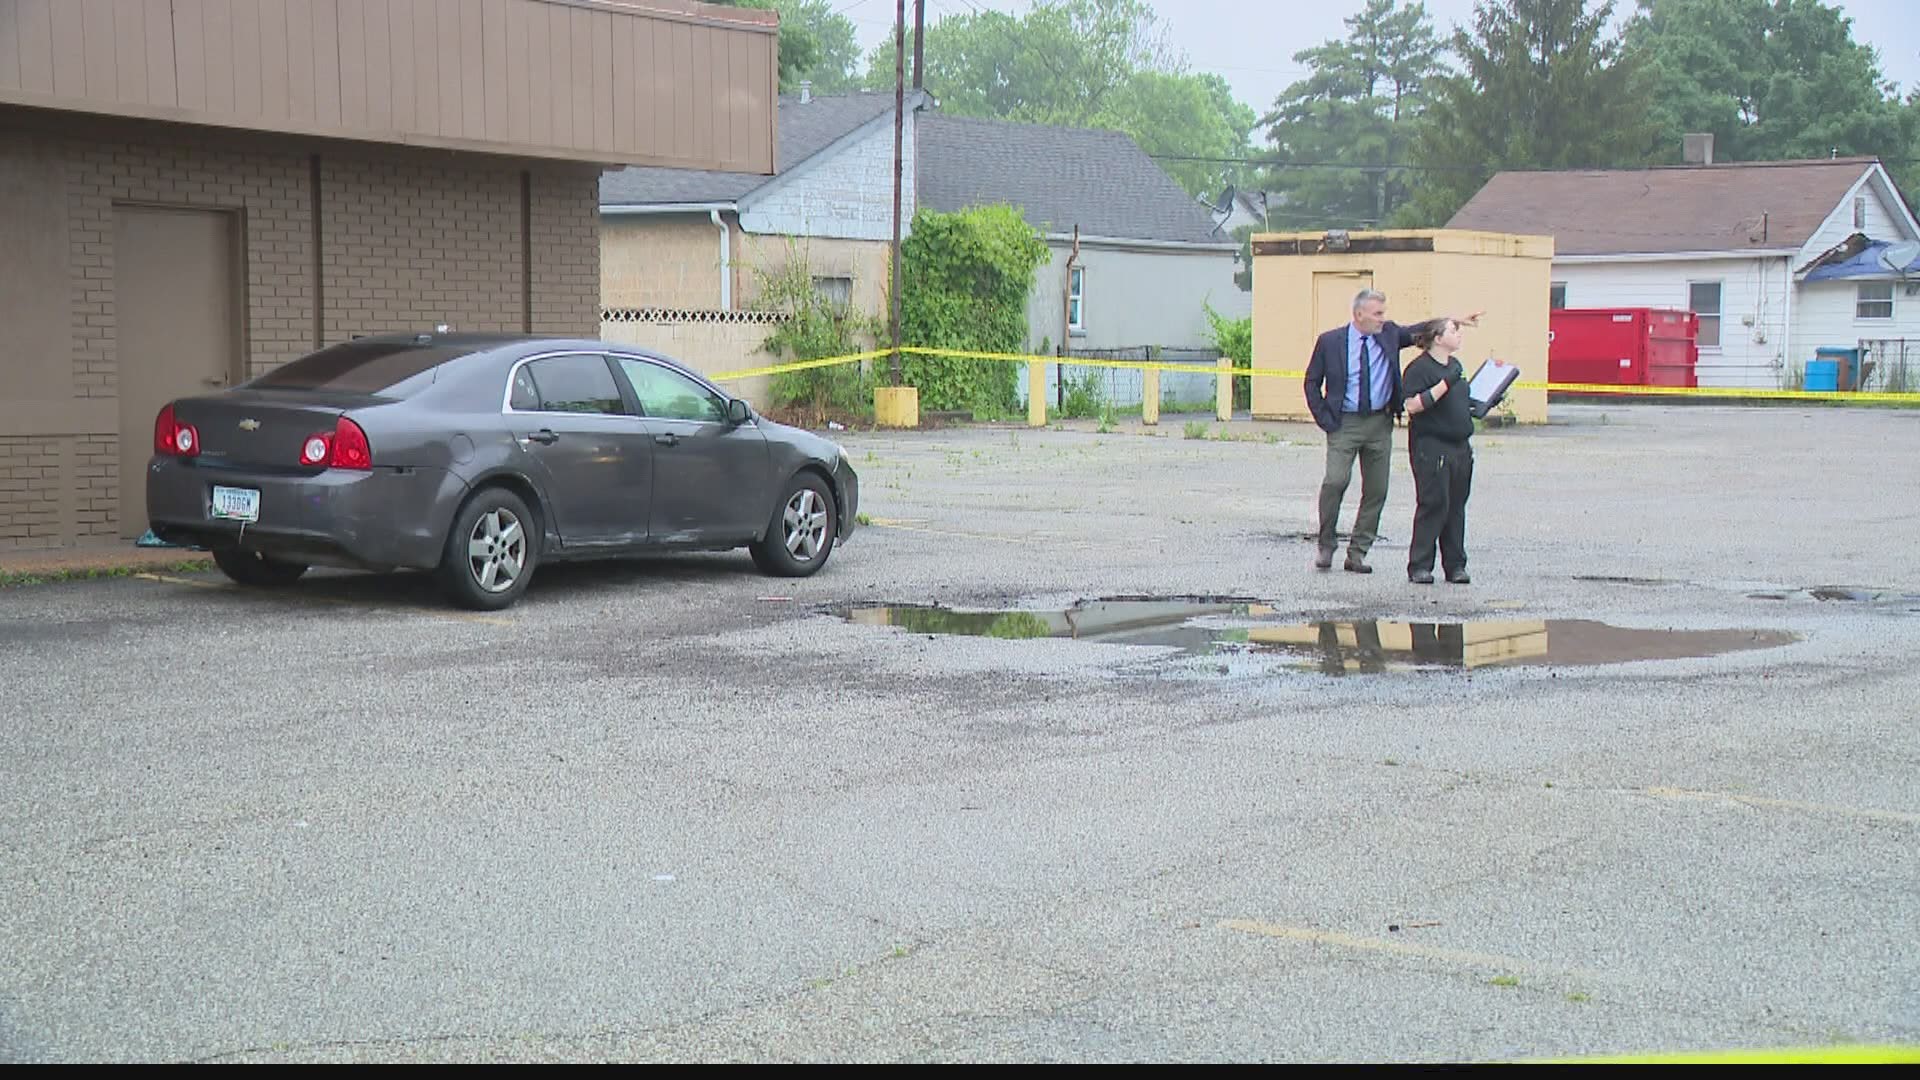 Police found a man shot in a car on Washington St. near Lynhurst Dr. early Thursday morning. He died at the hospital.